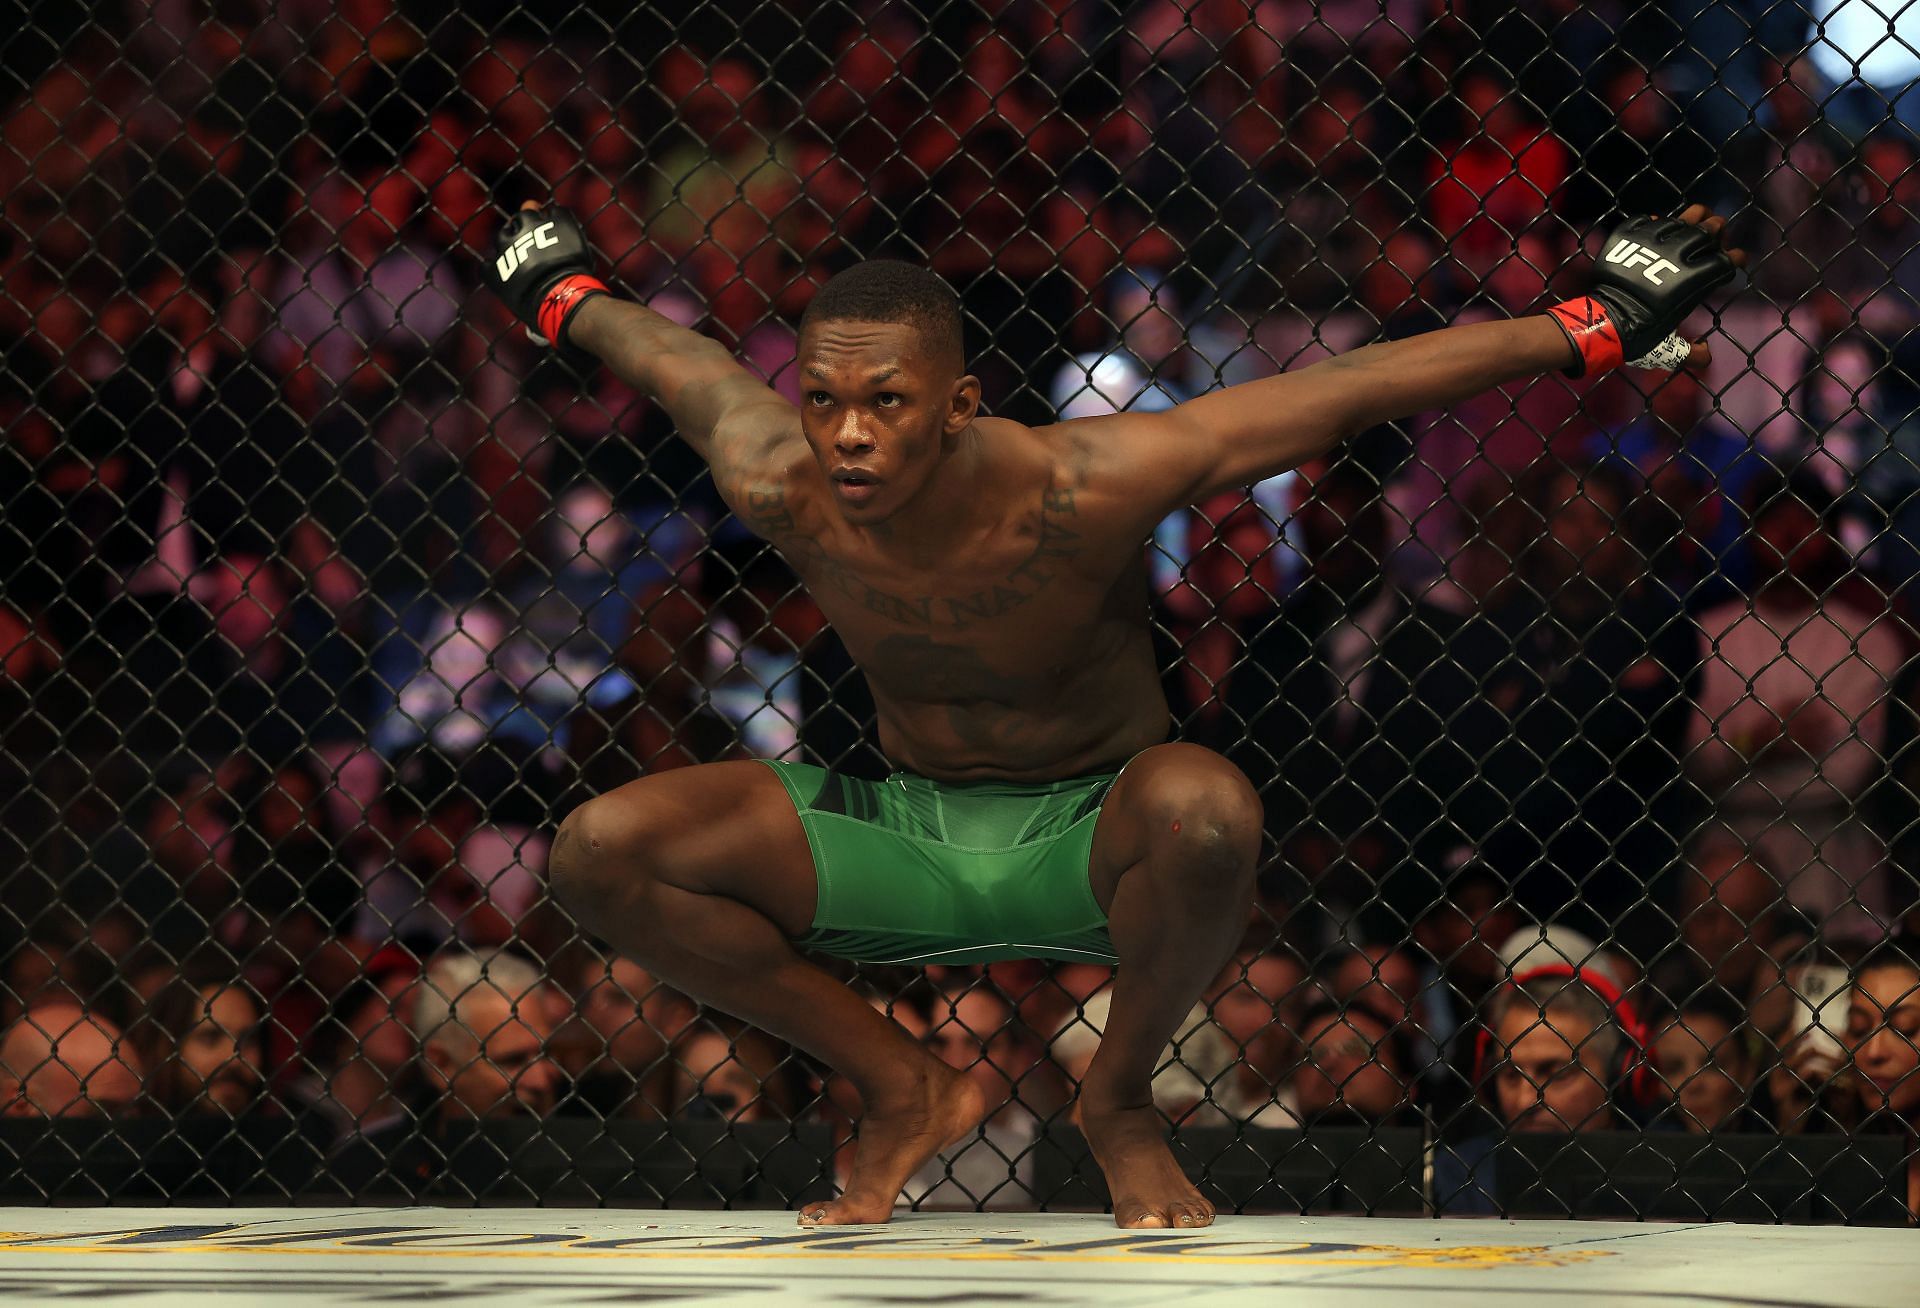 Despite a hole in his wrestling game, it seemed impossible to beat Israel Adesanya at points